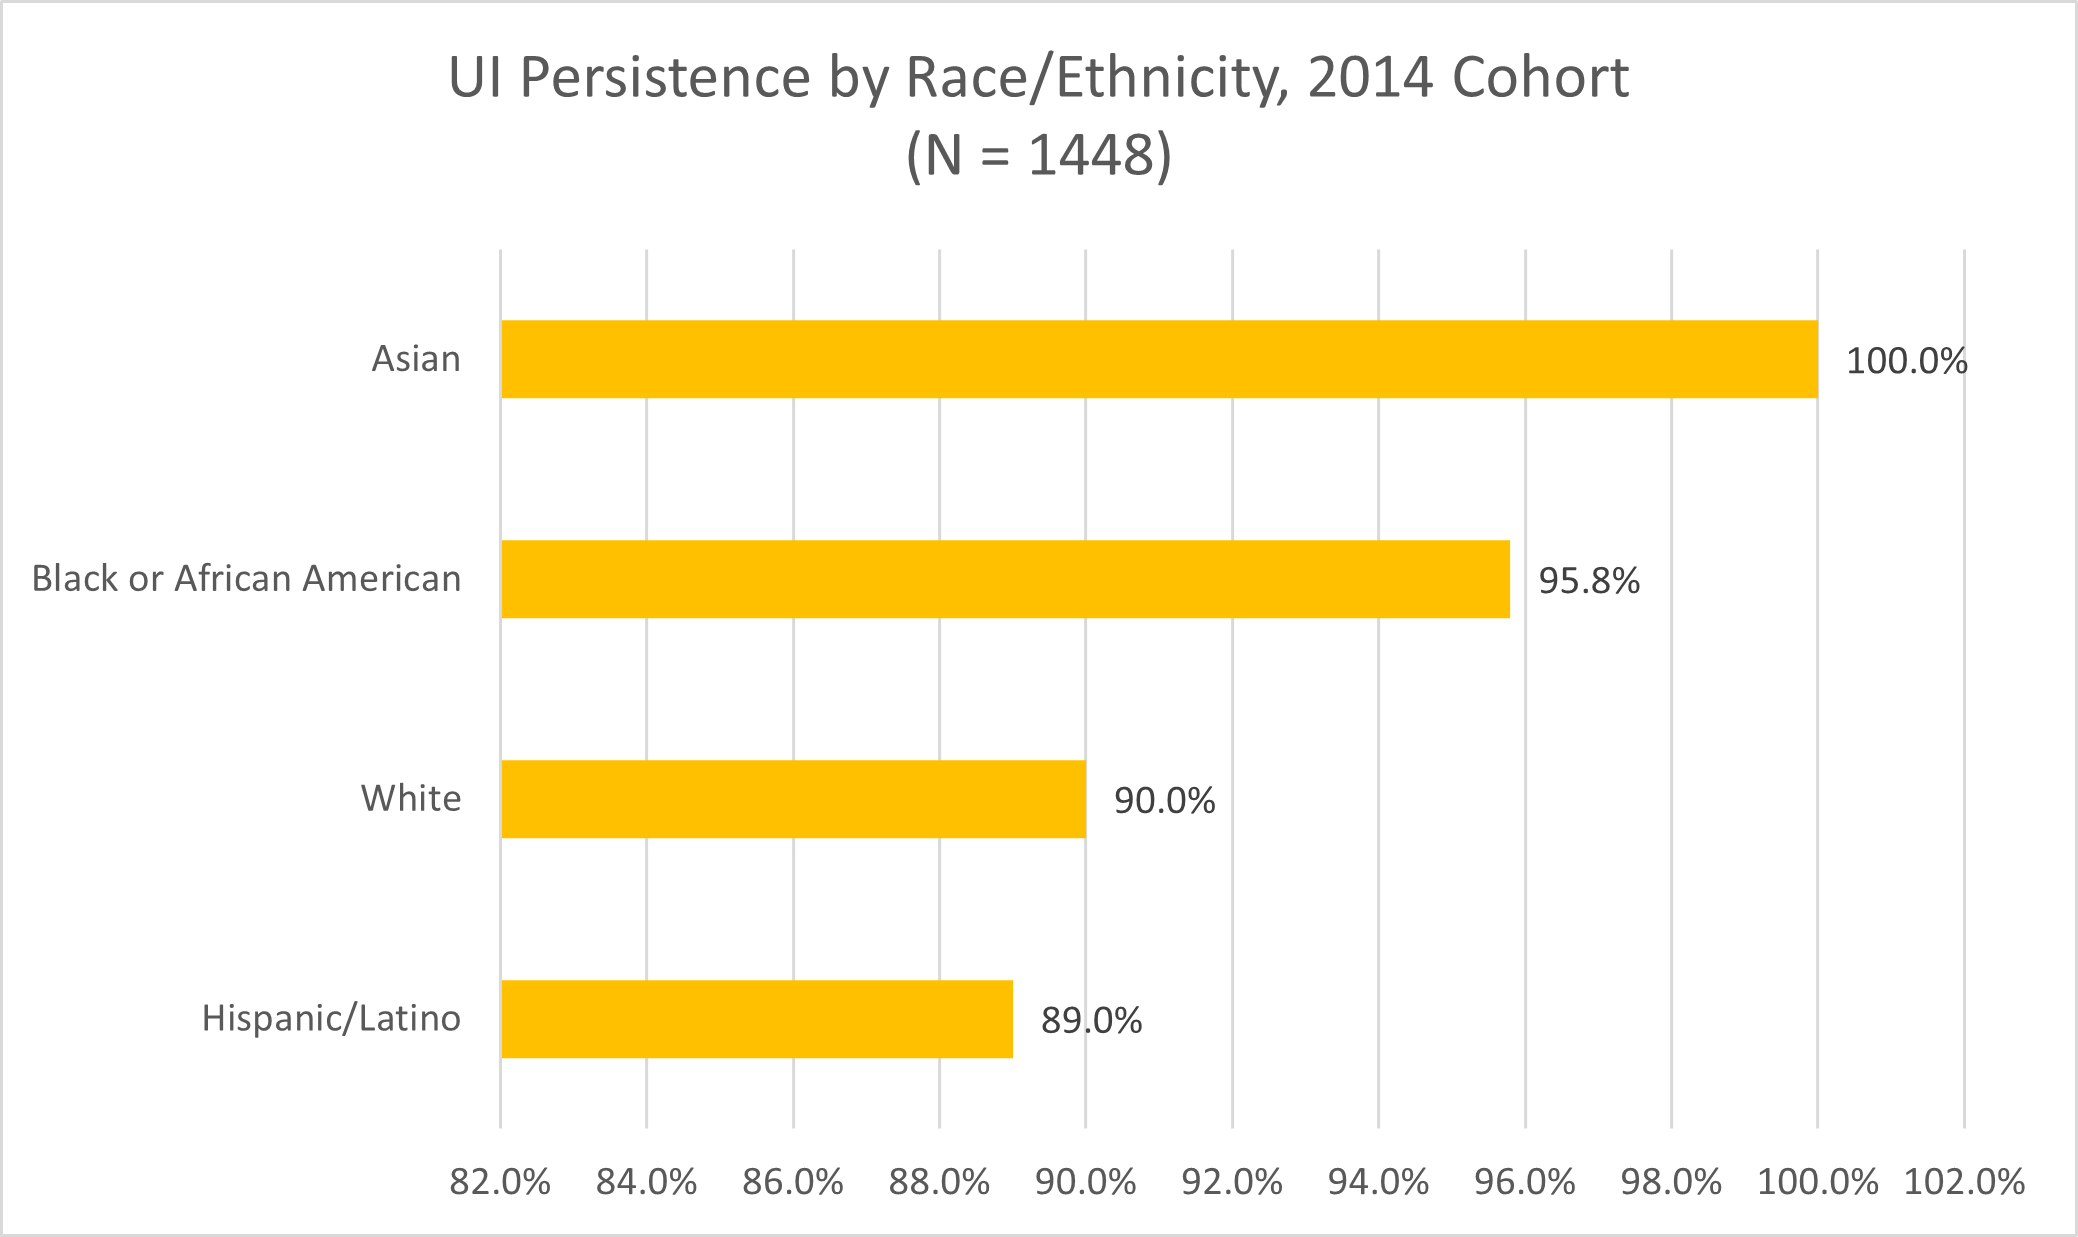 The U of I 2014 Cohort persistence rate was 100% for Asian students, 95.8% for Black or African American students, 90% for White students, and 89% for Hispanic/Latino students. 